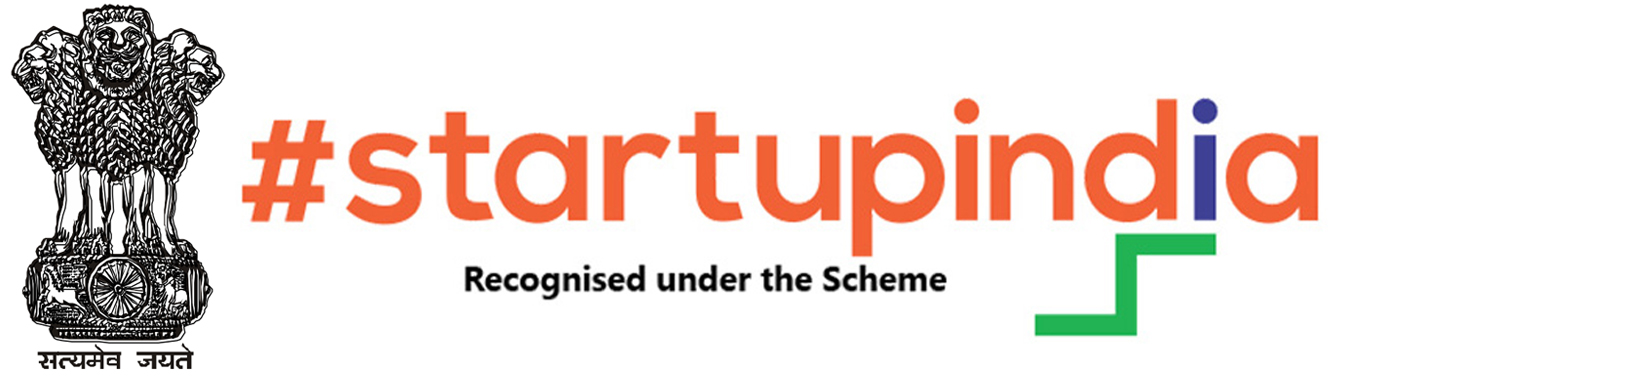 Startup India Seed Fund Scheme of Rs 945 crore